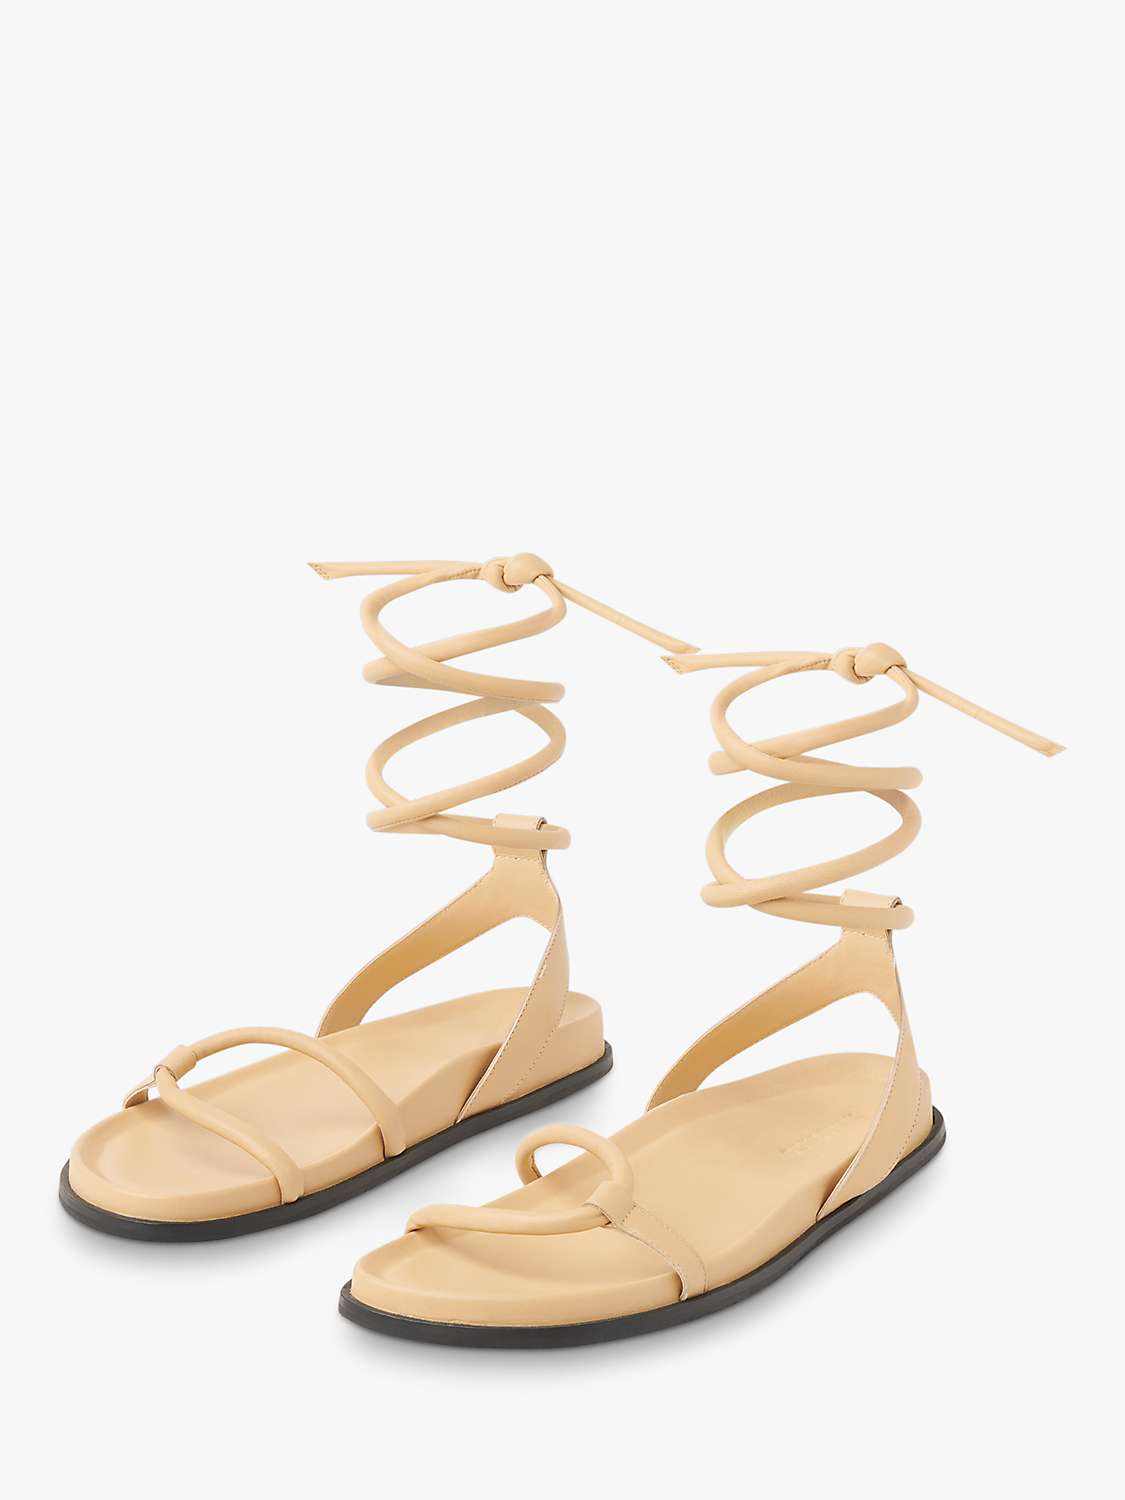 Buy Whistles Cleo Leather Padded Sandals, Camel Online at johnlewis.com